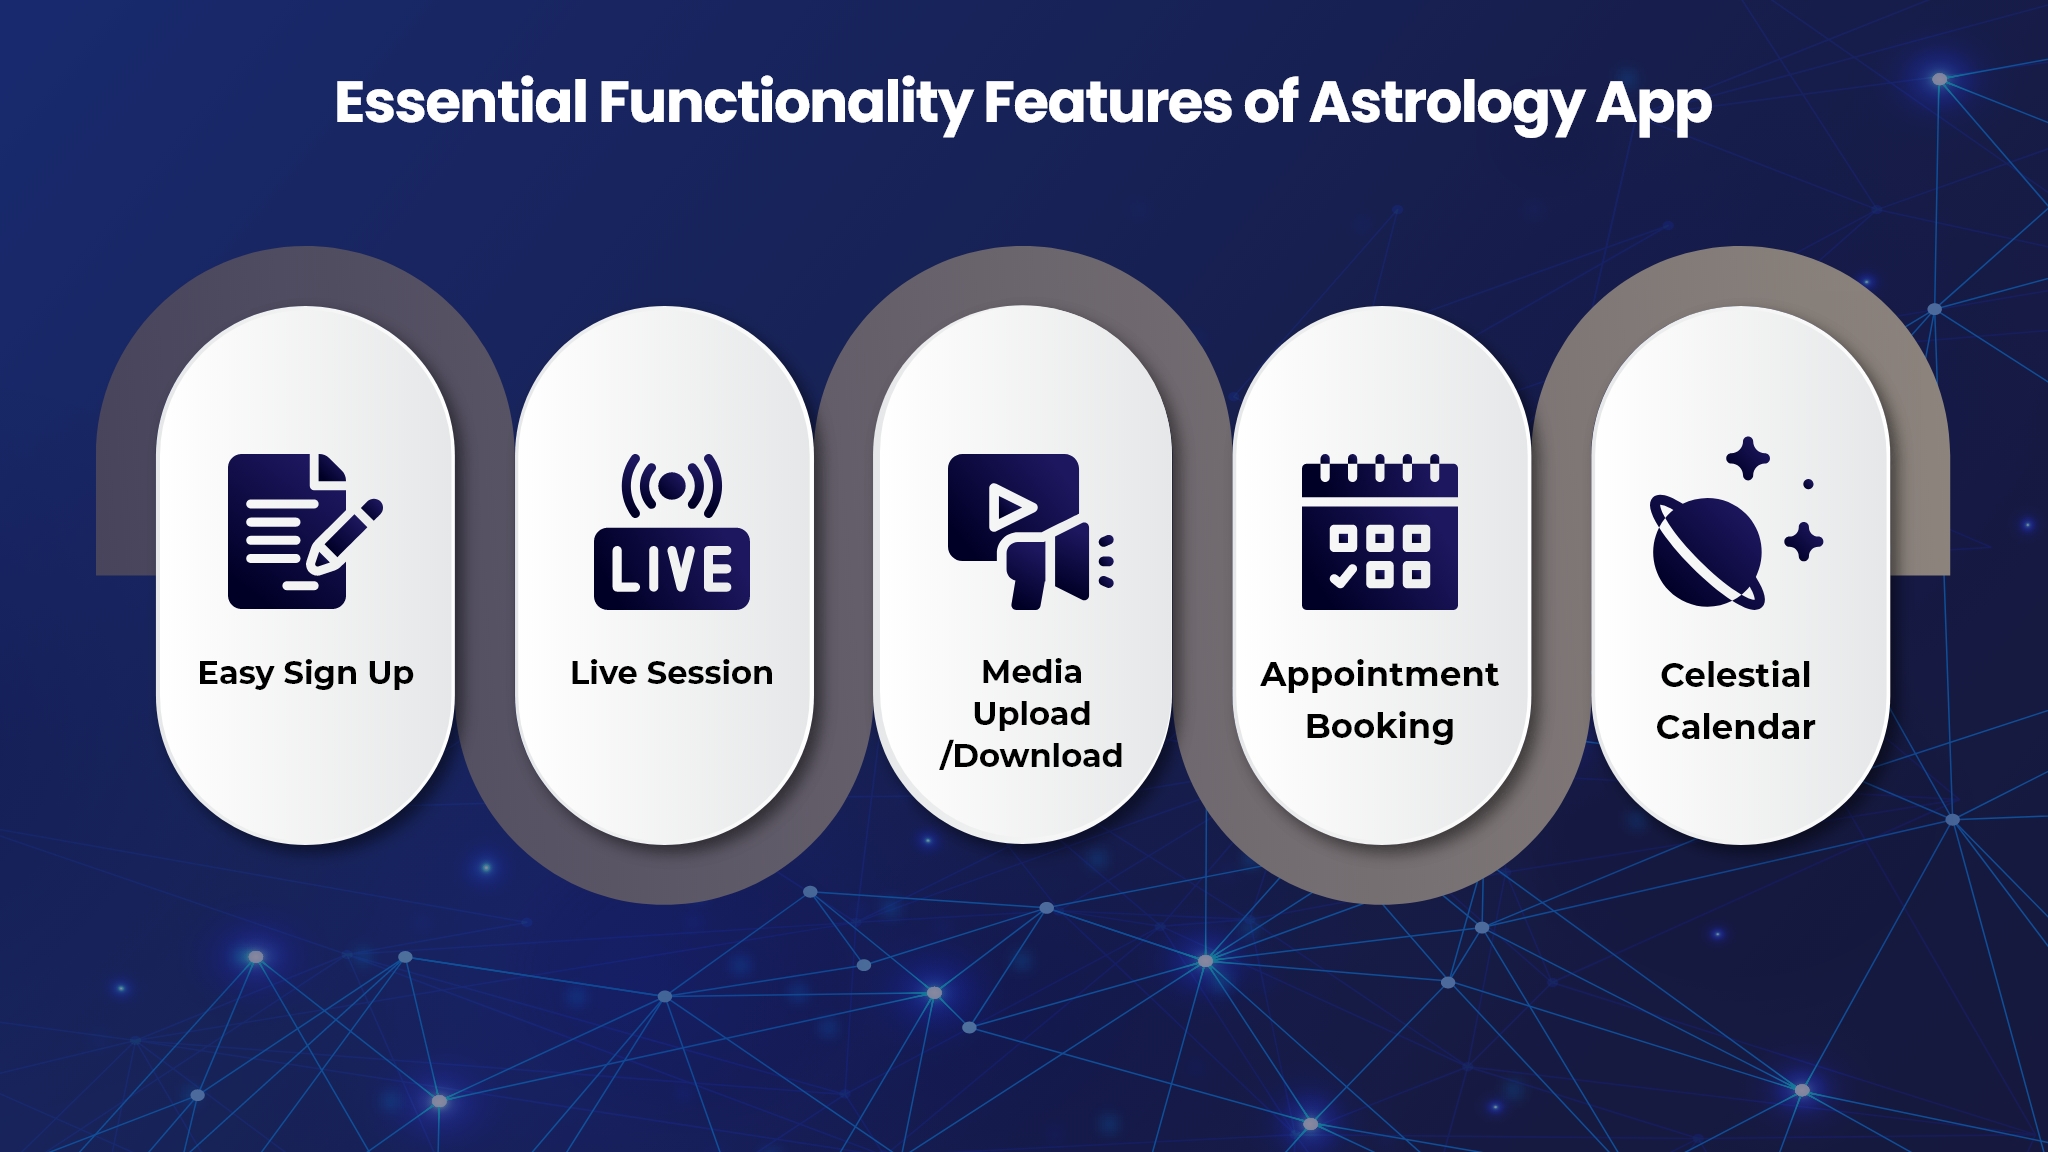 Features of Astrology App That Affect The Cost of Development